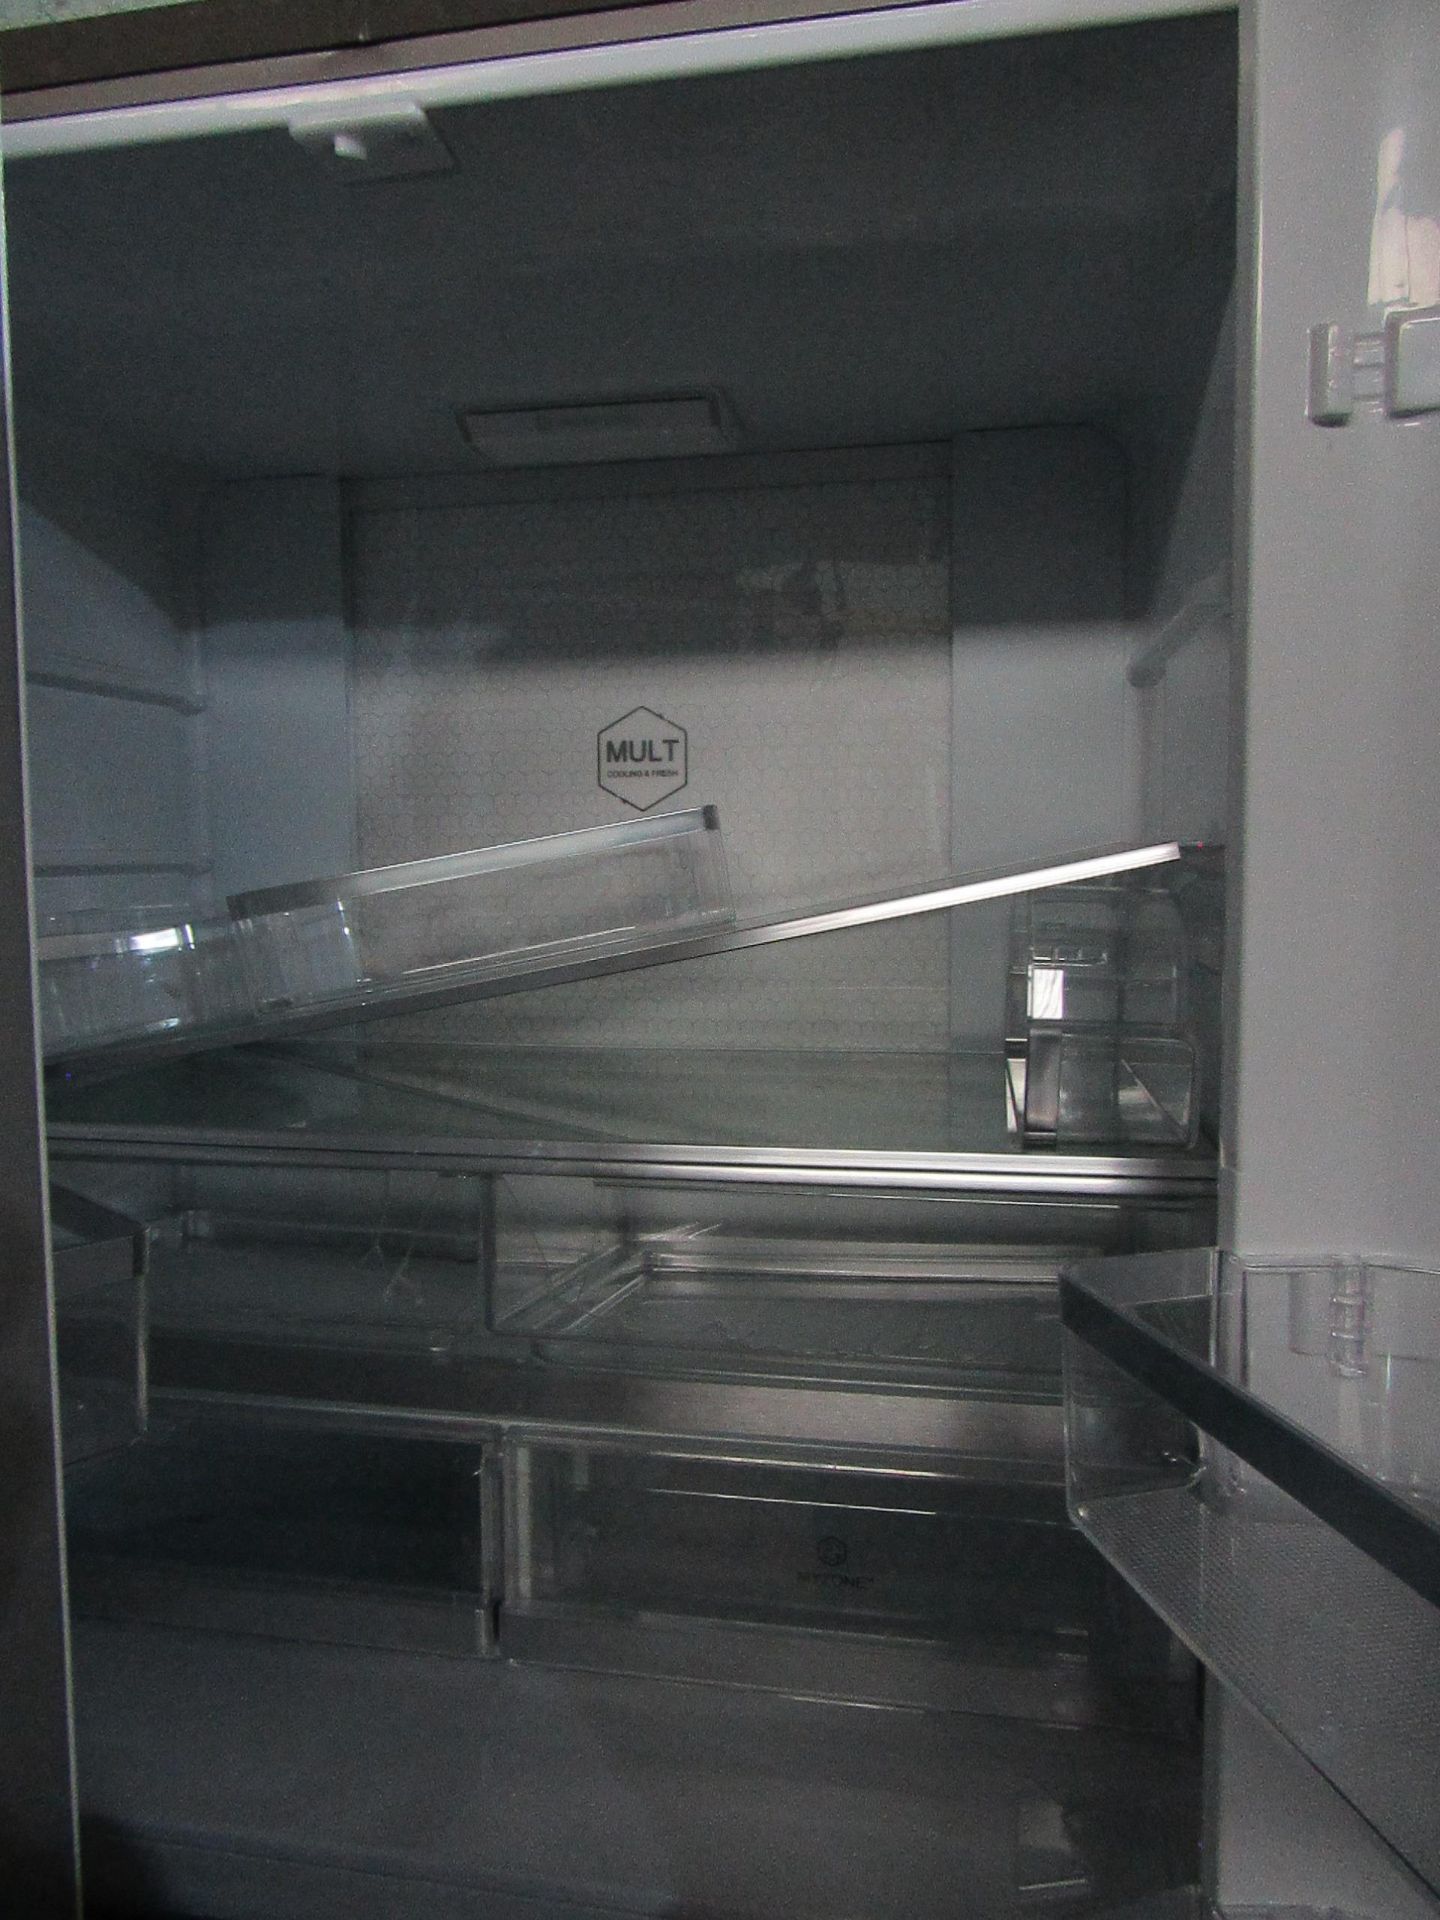 Haier American firdge freezer, clean insode and has some marks and dents on the front and the - Image 2 of 2